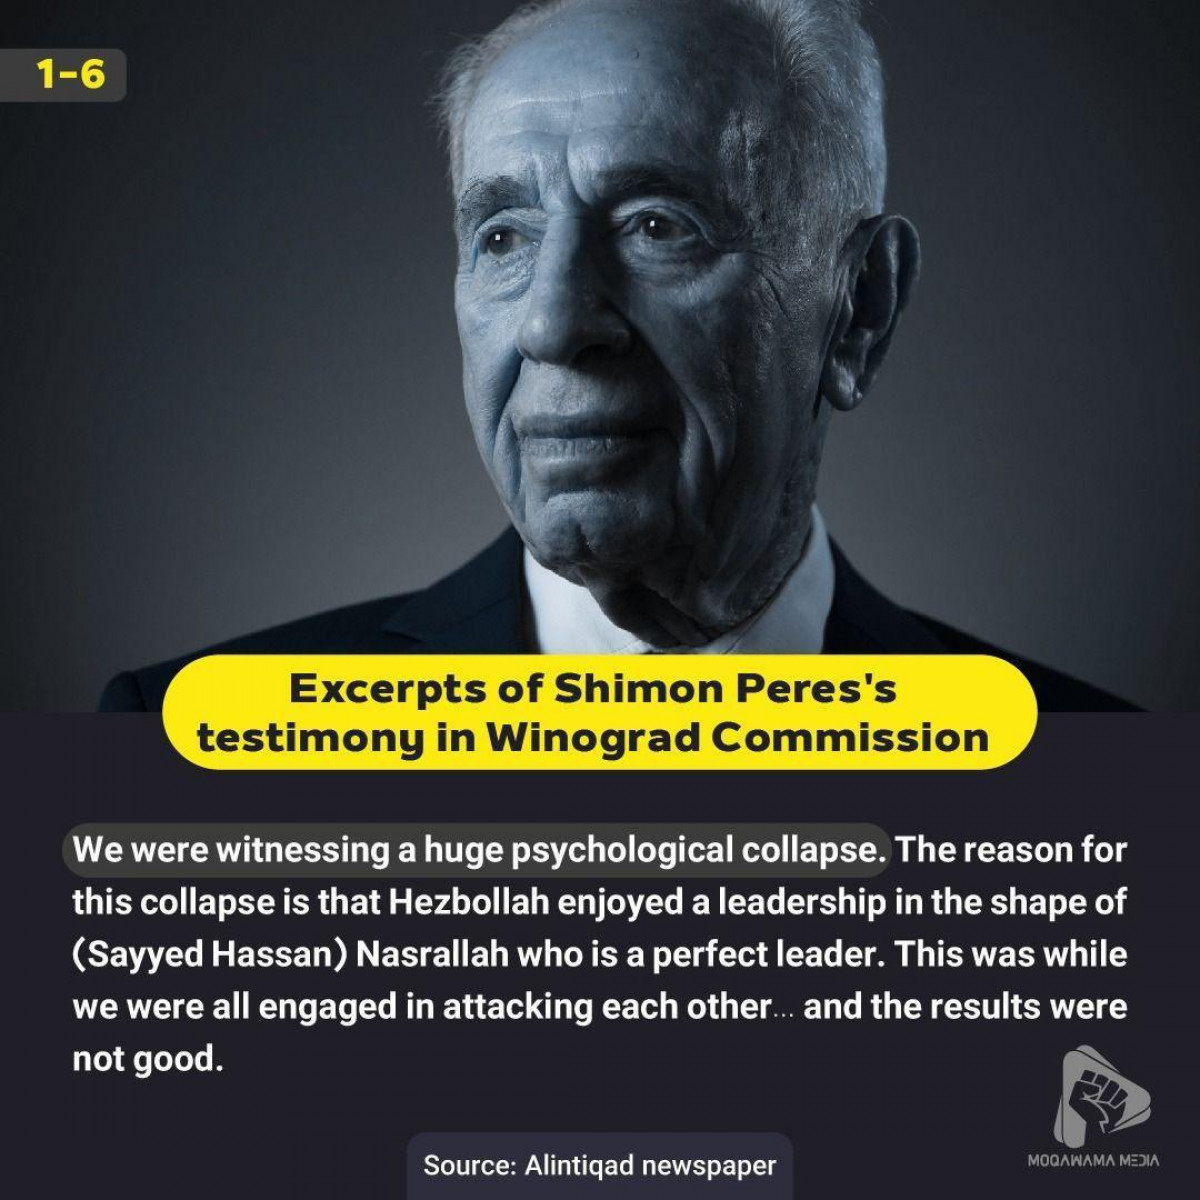 Excerpts of Shimon Peres's testimony in Winograd Commission